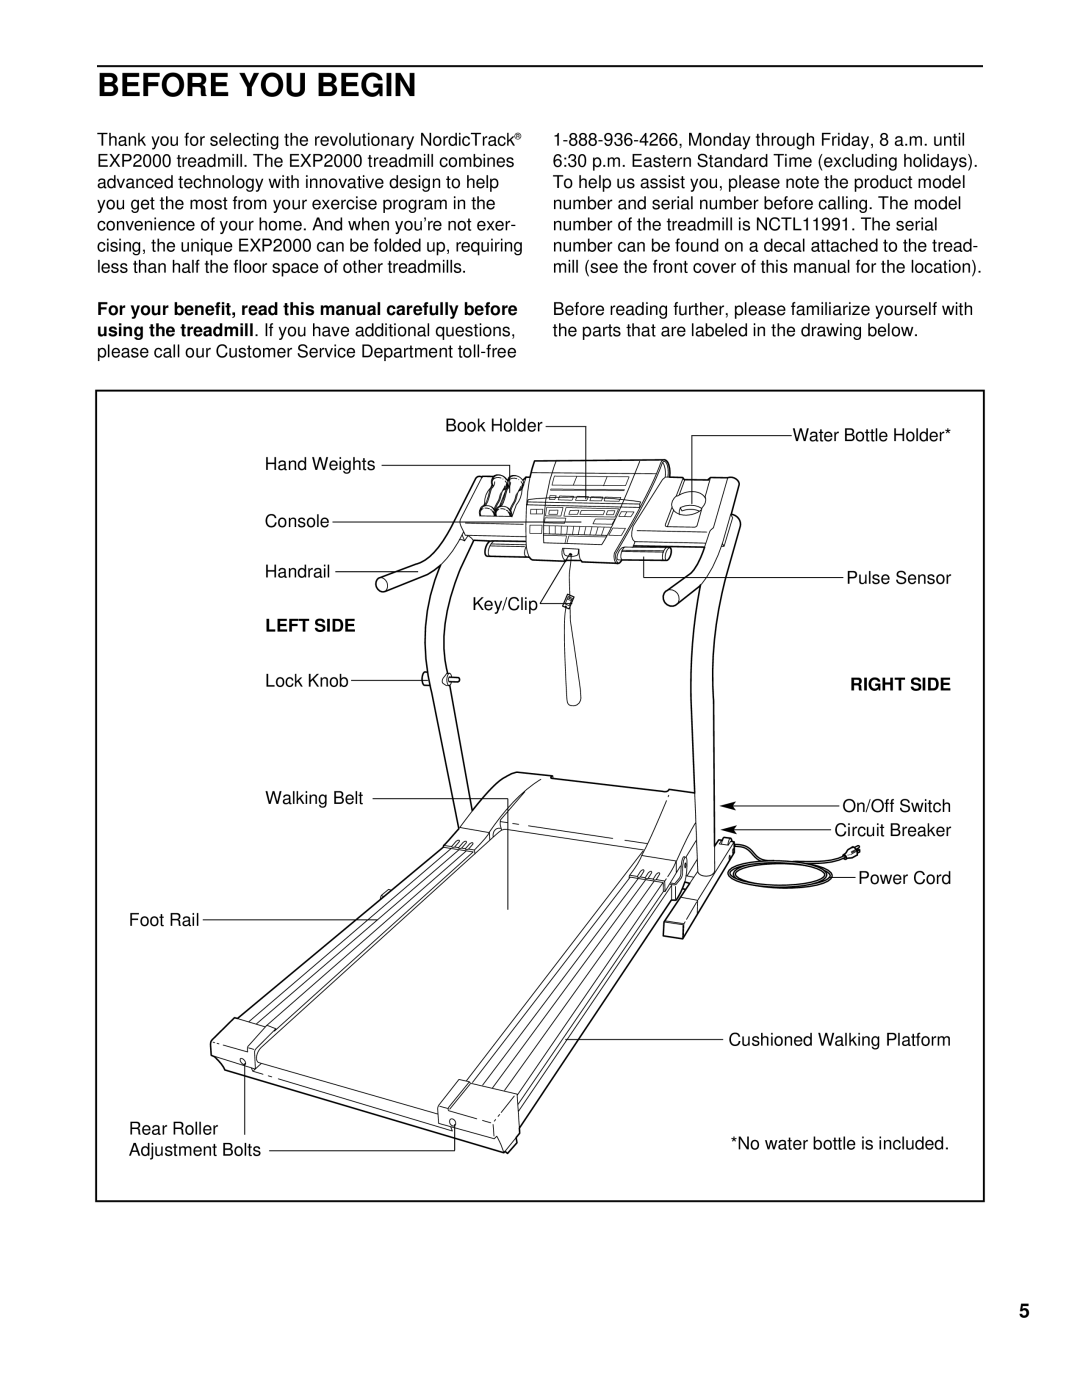 NordicTrack NCTL11991 user manual Before YOU Begin, Using the treadmill, Left Side, Right Side 